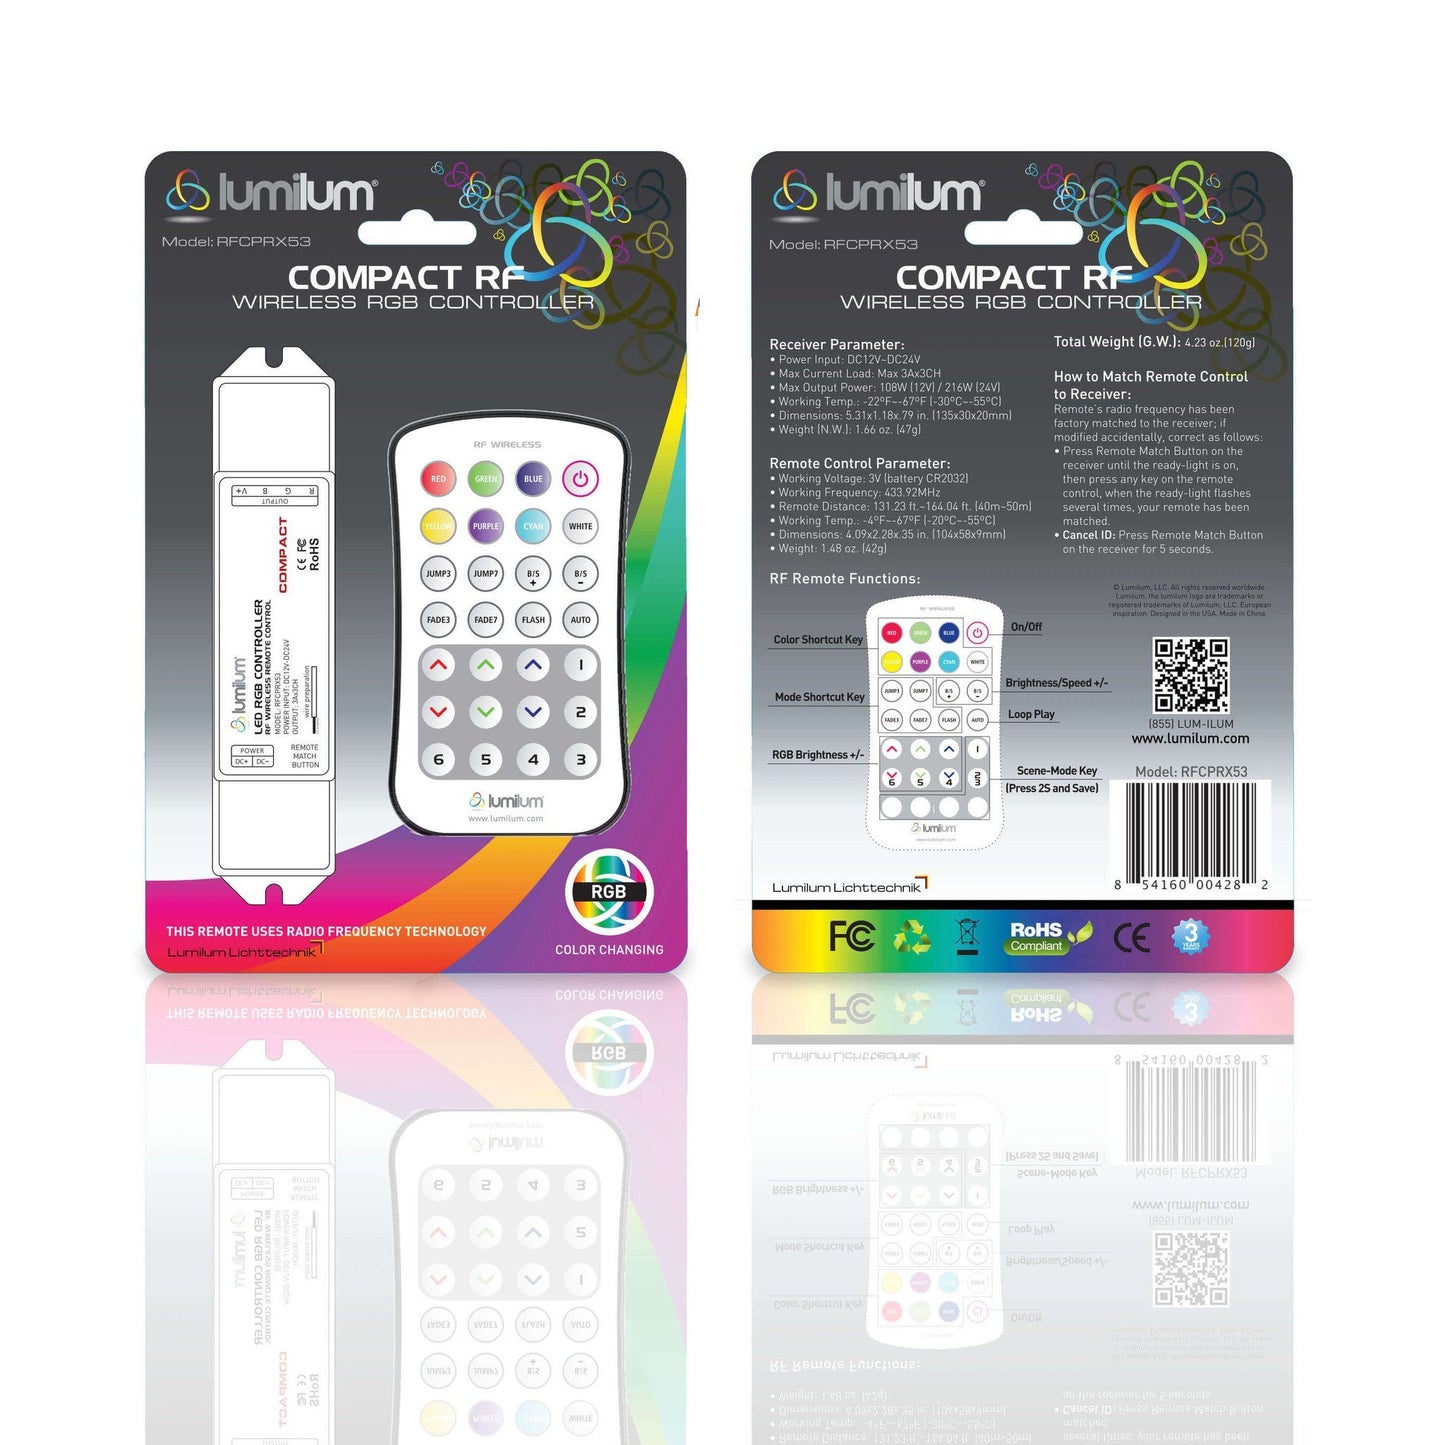 lumilum brand rf remote controller multicolored packaging with remote image on frontside on left and backside of packaging showing instructions on right